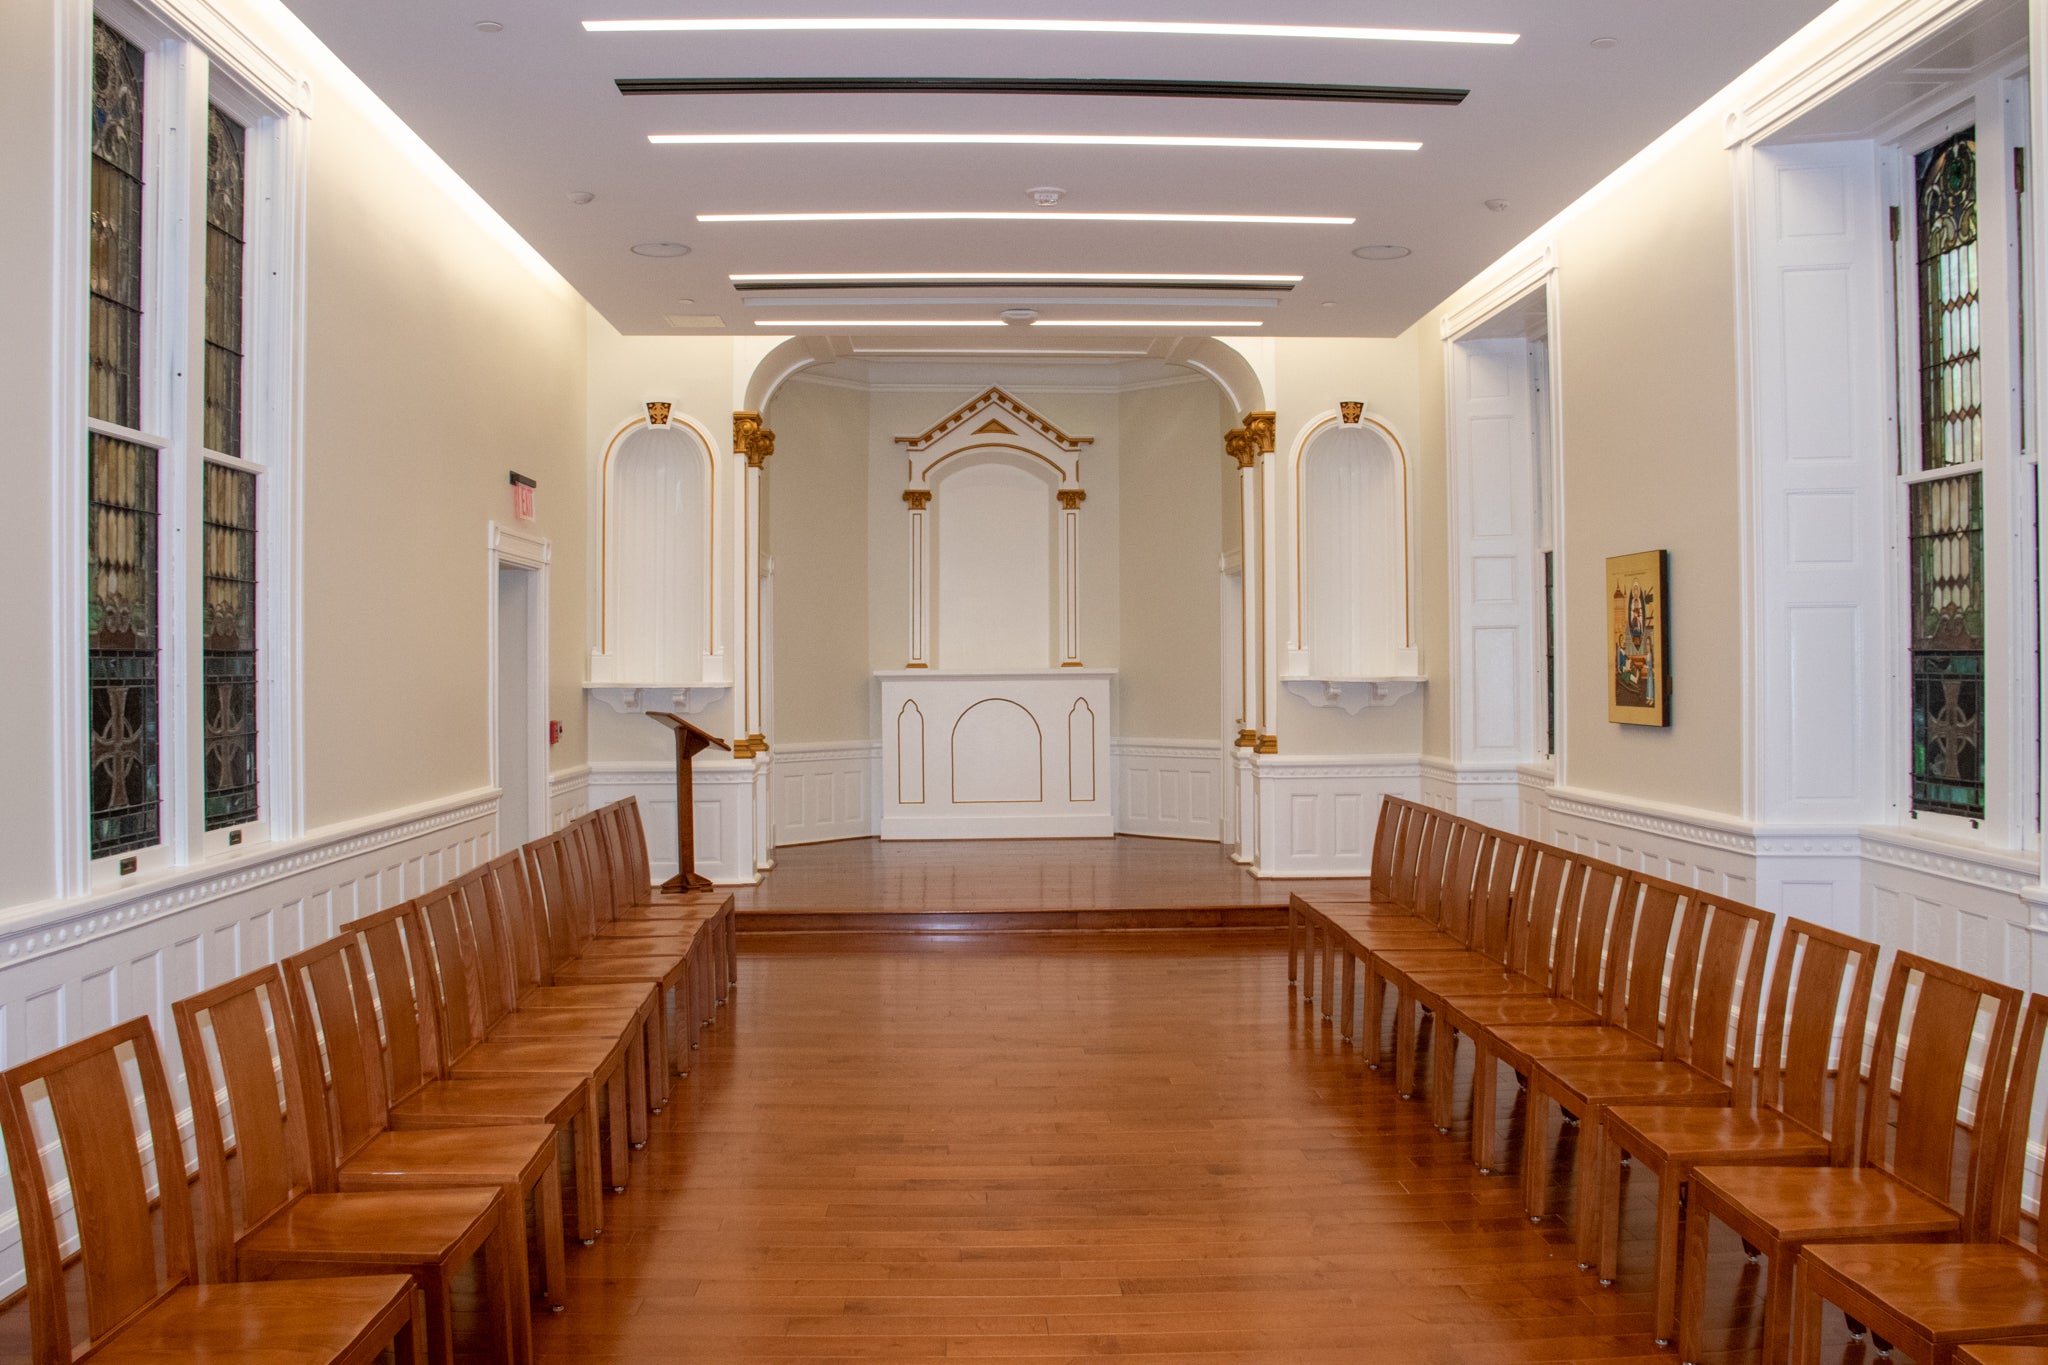 Picture of the ecumenical chapel. Orange colored wood flooring with two rows of chairs on either sided of the image. There is an altar in the back of the image with stained glass windows on either sided, and a painting of St. Ignatius on the left wall.